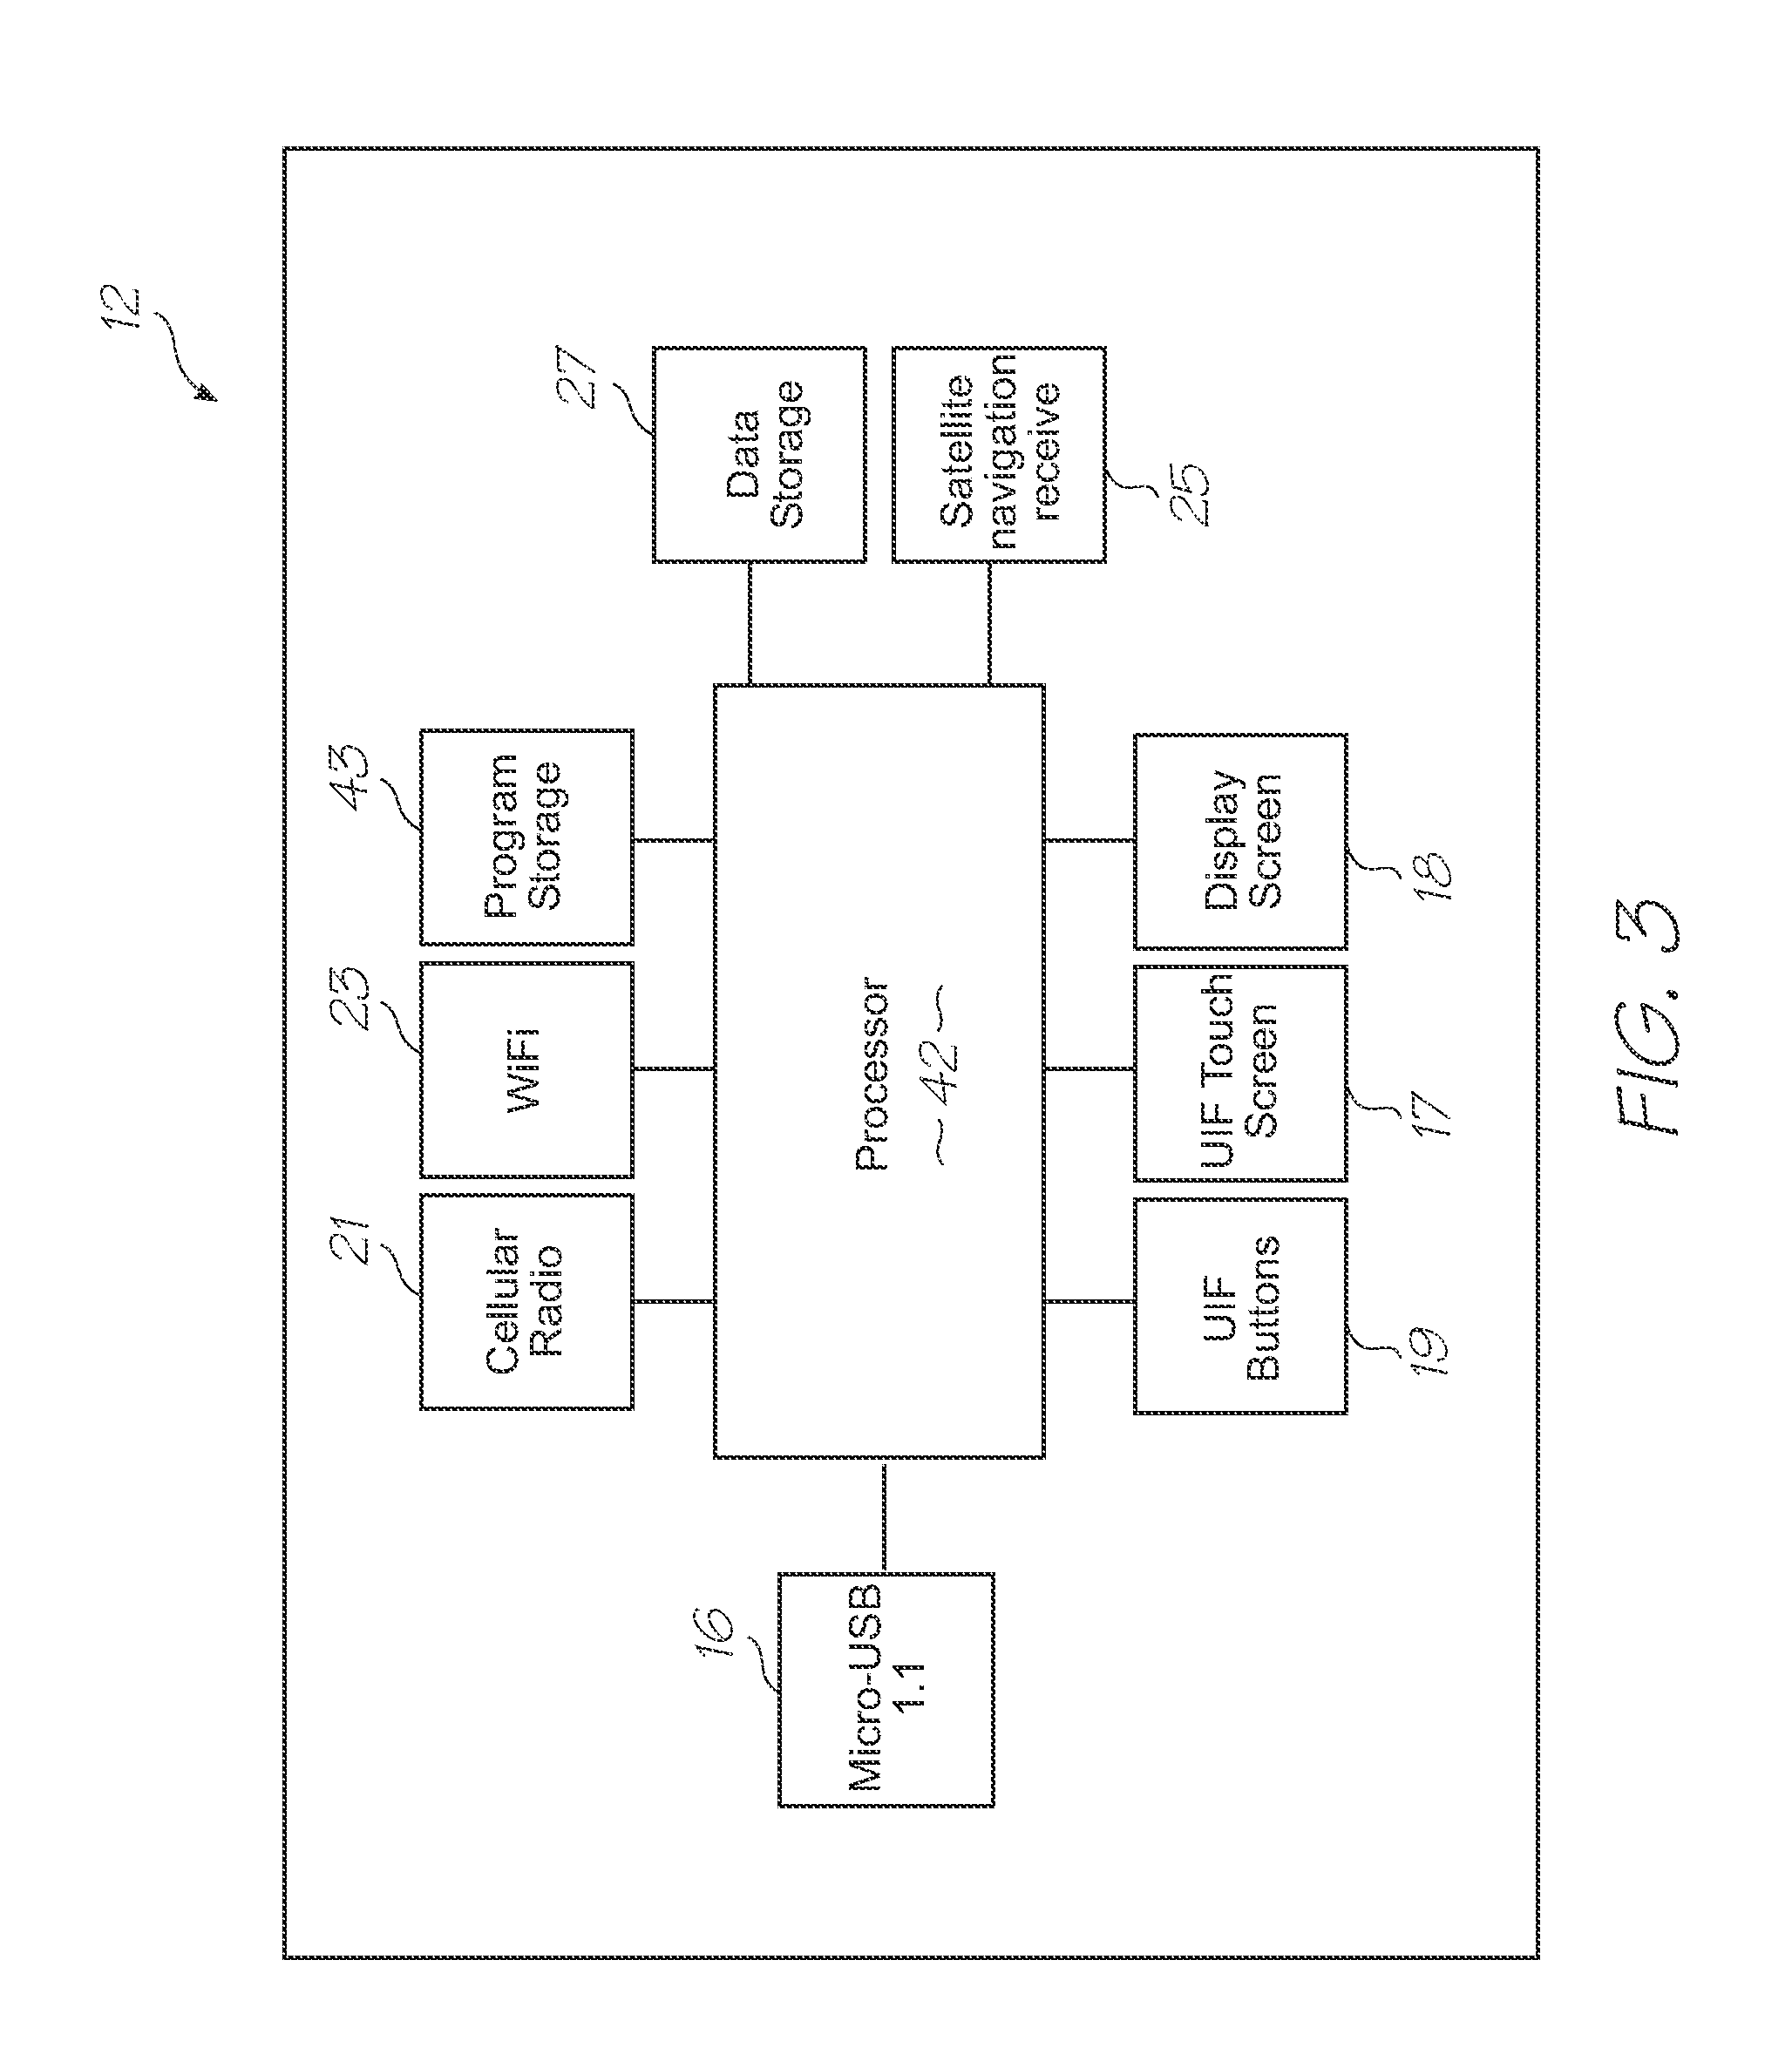 Loc device for electrochemiluminescent detection of target nucleic acid sequences using hybridization chamber array and negative control chamber without probes